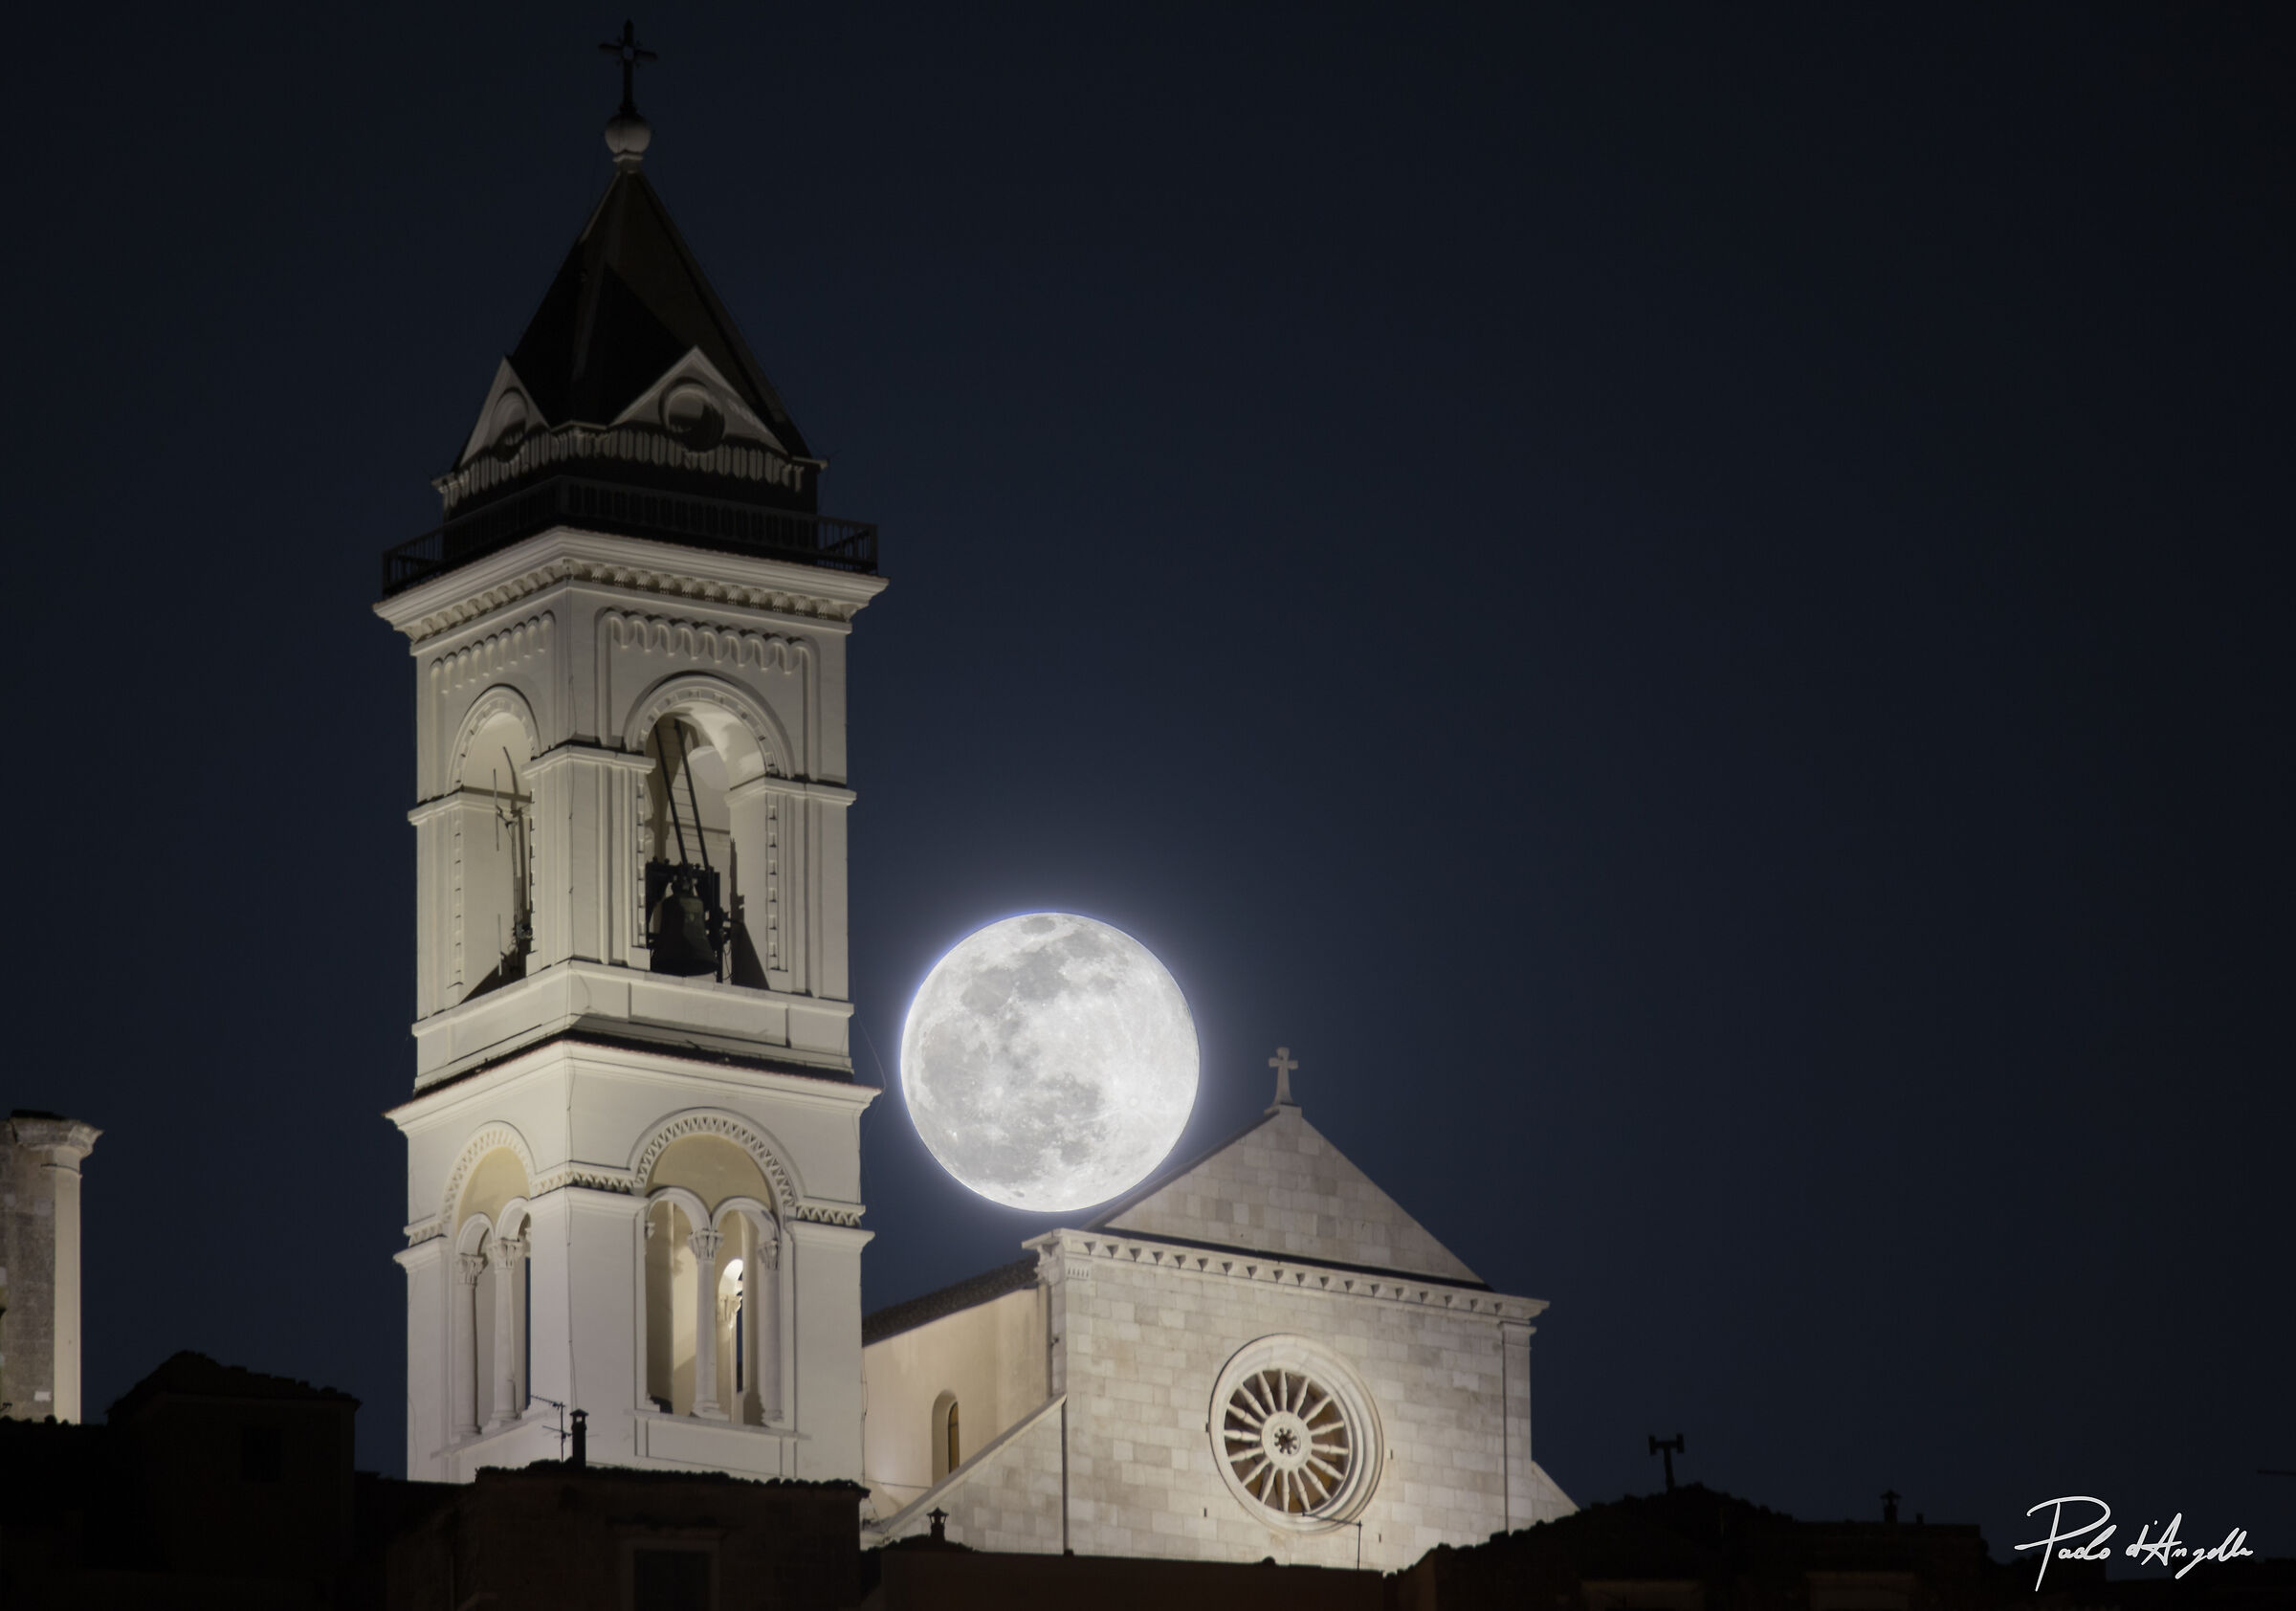 The Moon and minervino cathedral...